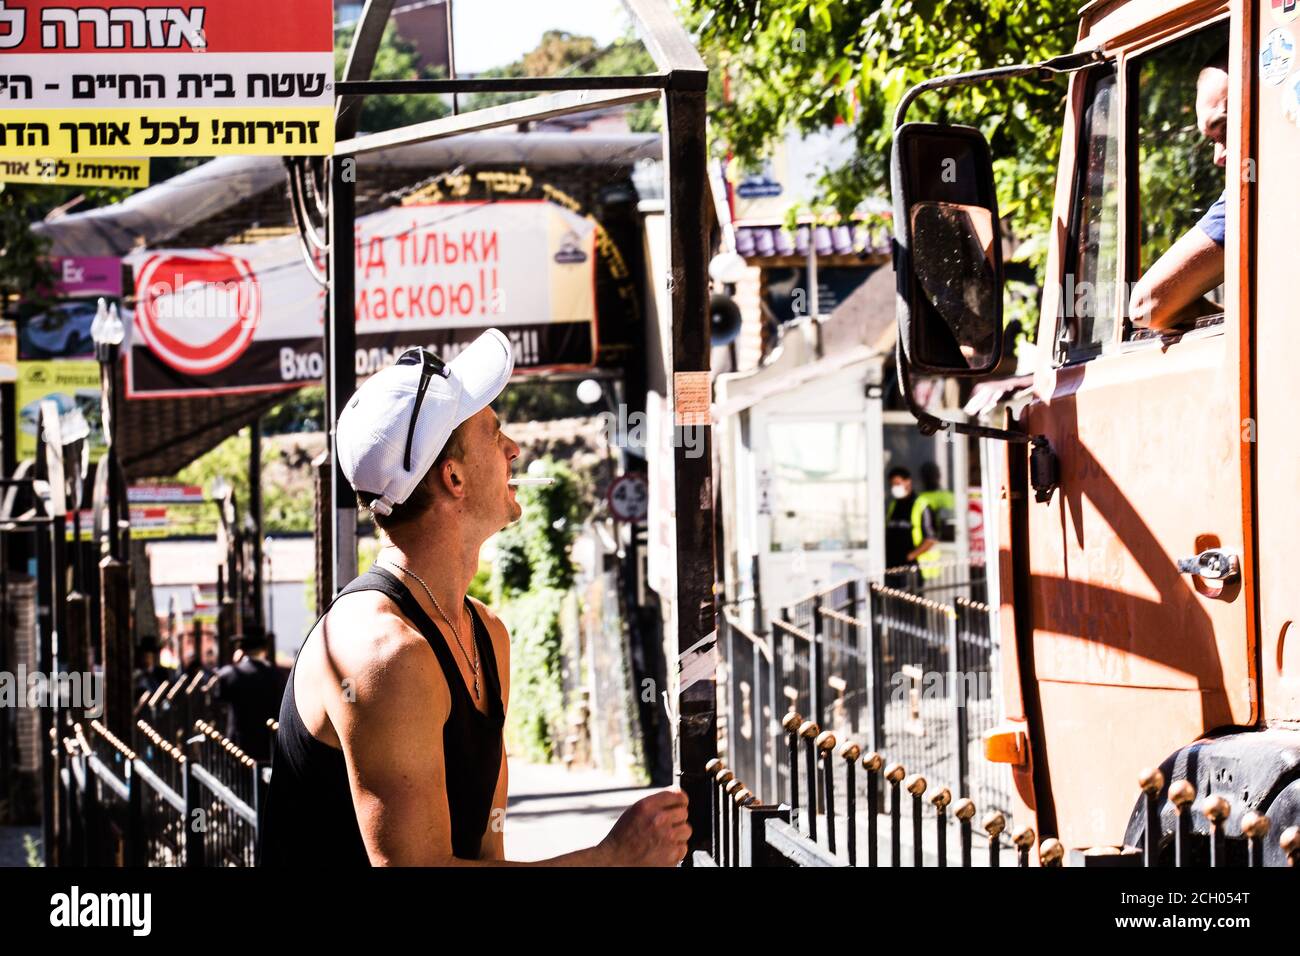 Two workers, one of them a truck driver, former classmates, talk on Pushkin str in Uman (Ukraine) near memorial of Zaddik Nachman attended by Hasidim. Stock Photo